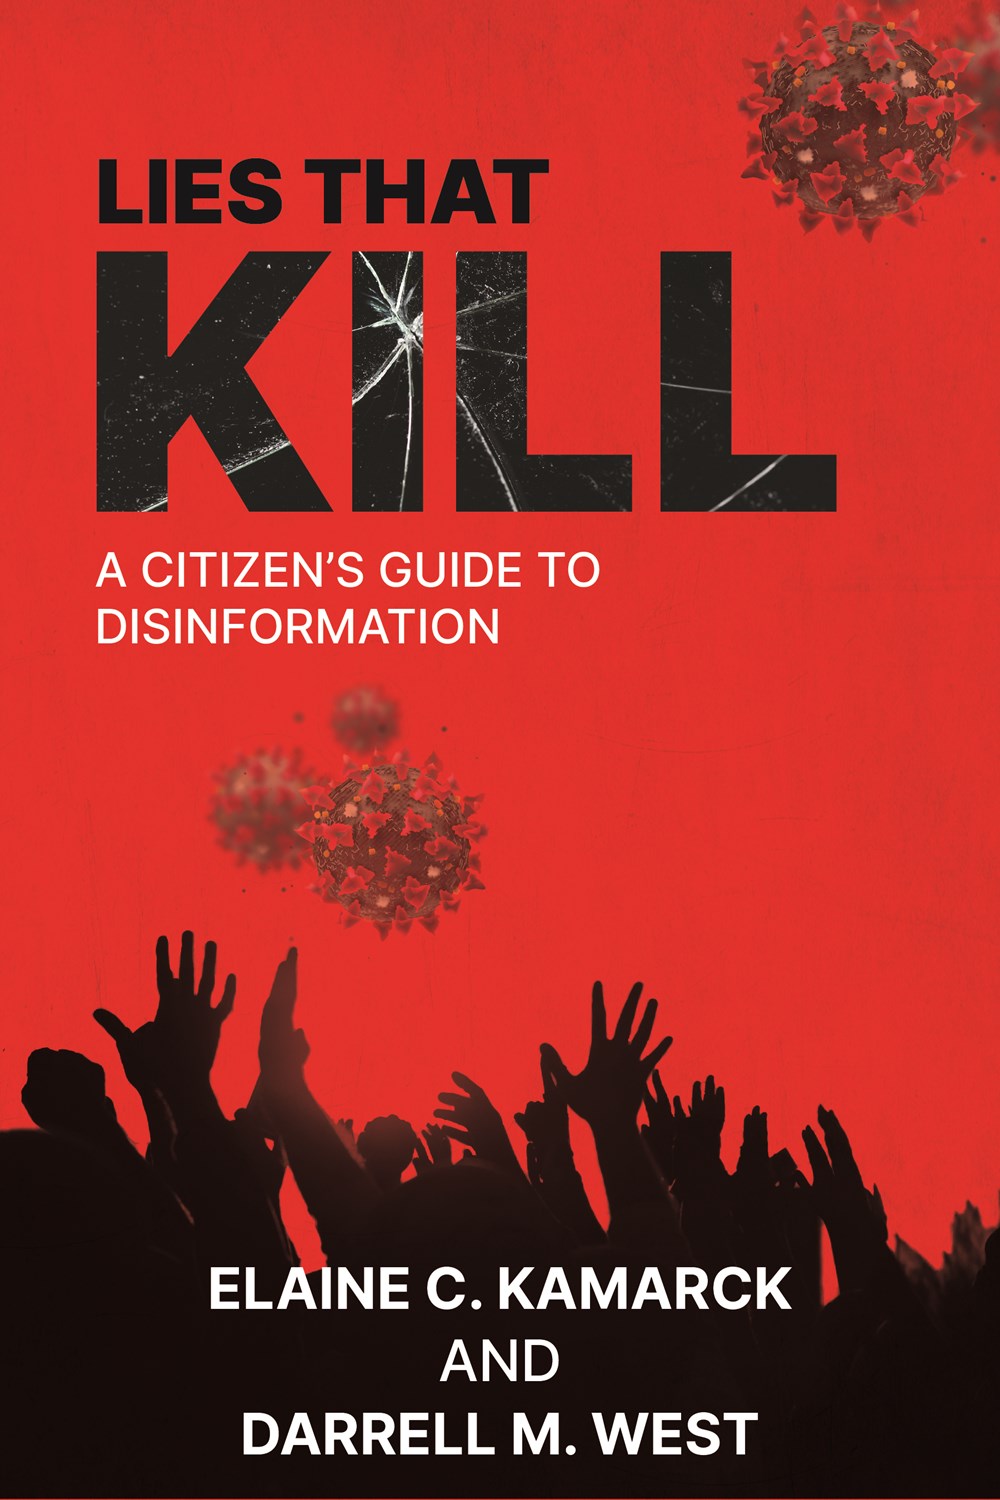 ‘Lies That Kill: A Citizen’s Guide to Disinformation’ by Elaine Kamarck & Darrell M. West | LJ Review of the Day